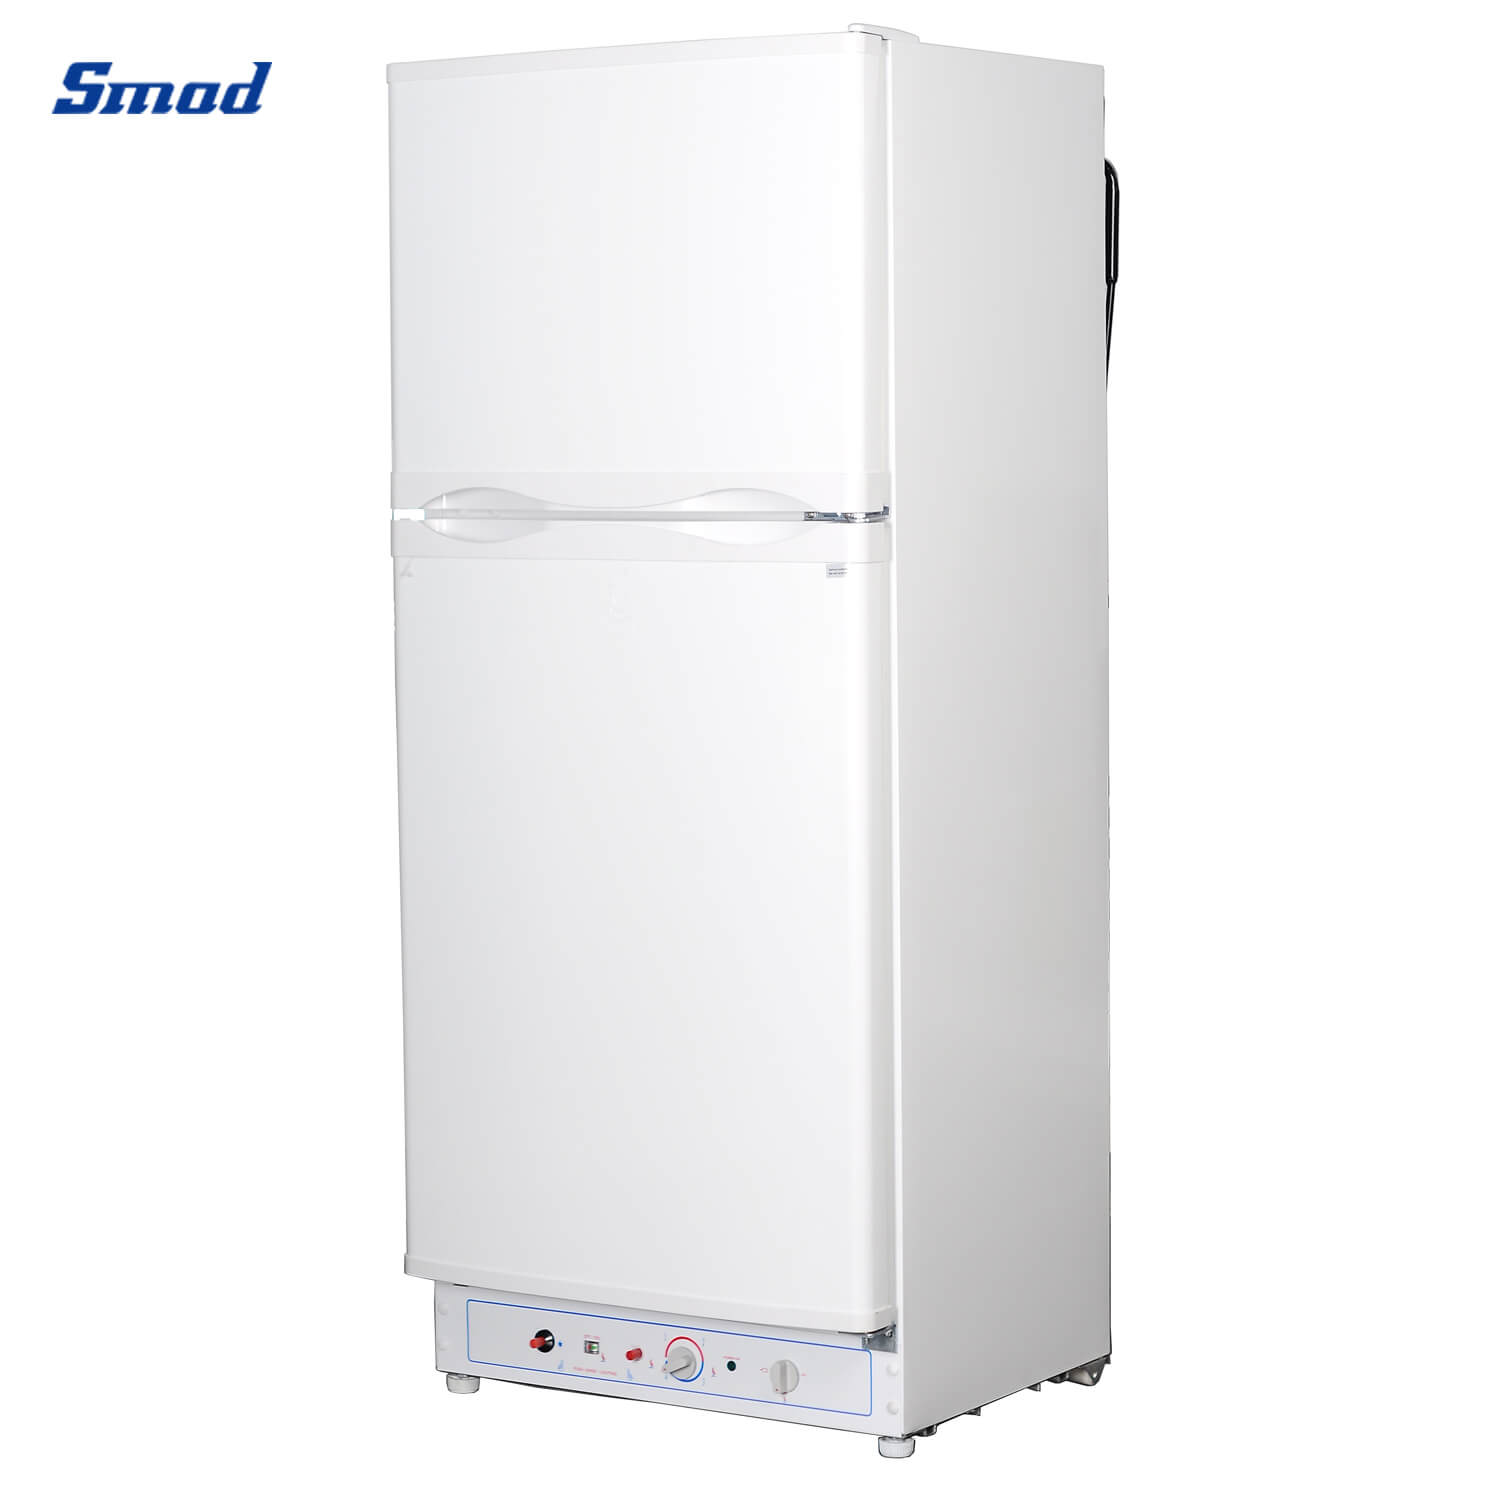 
Smad Gas / Absorption Double Door Refrigerator with Auto Defrost